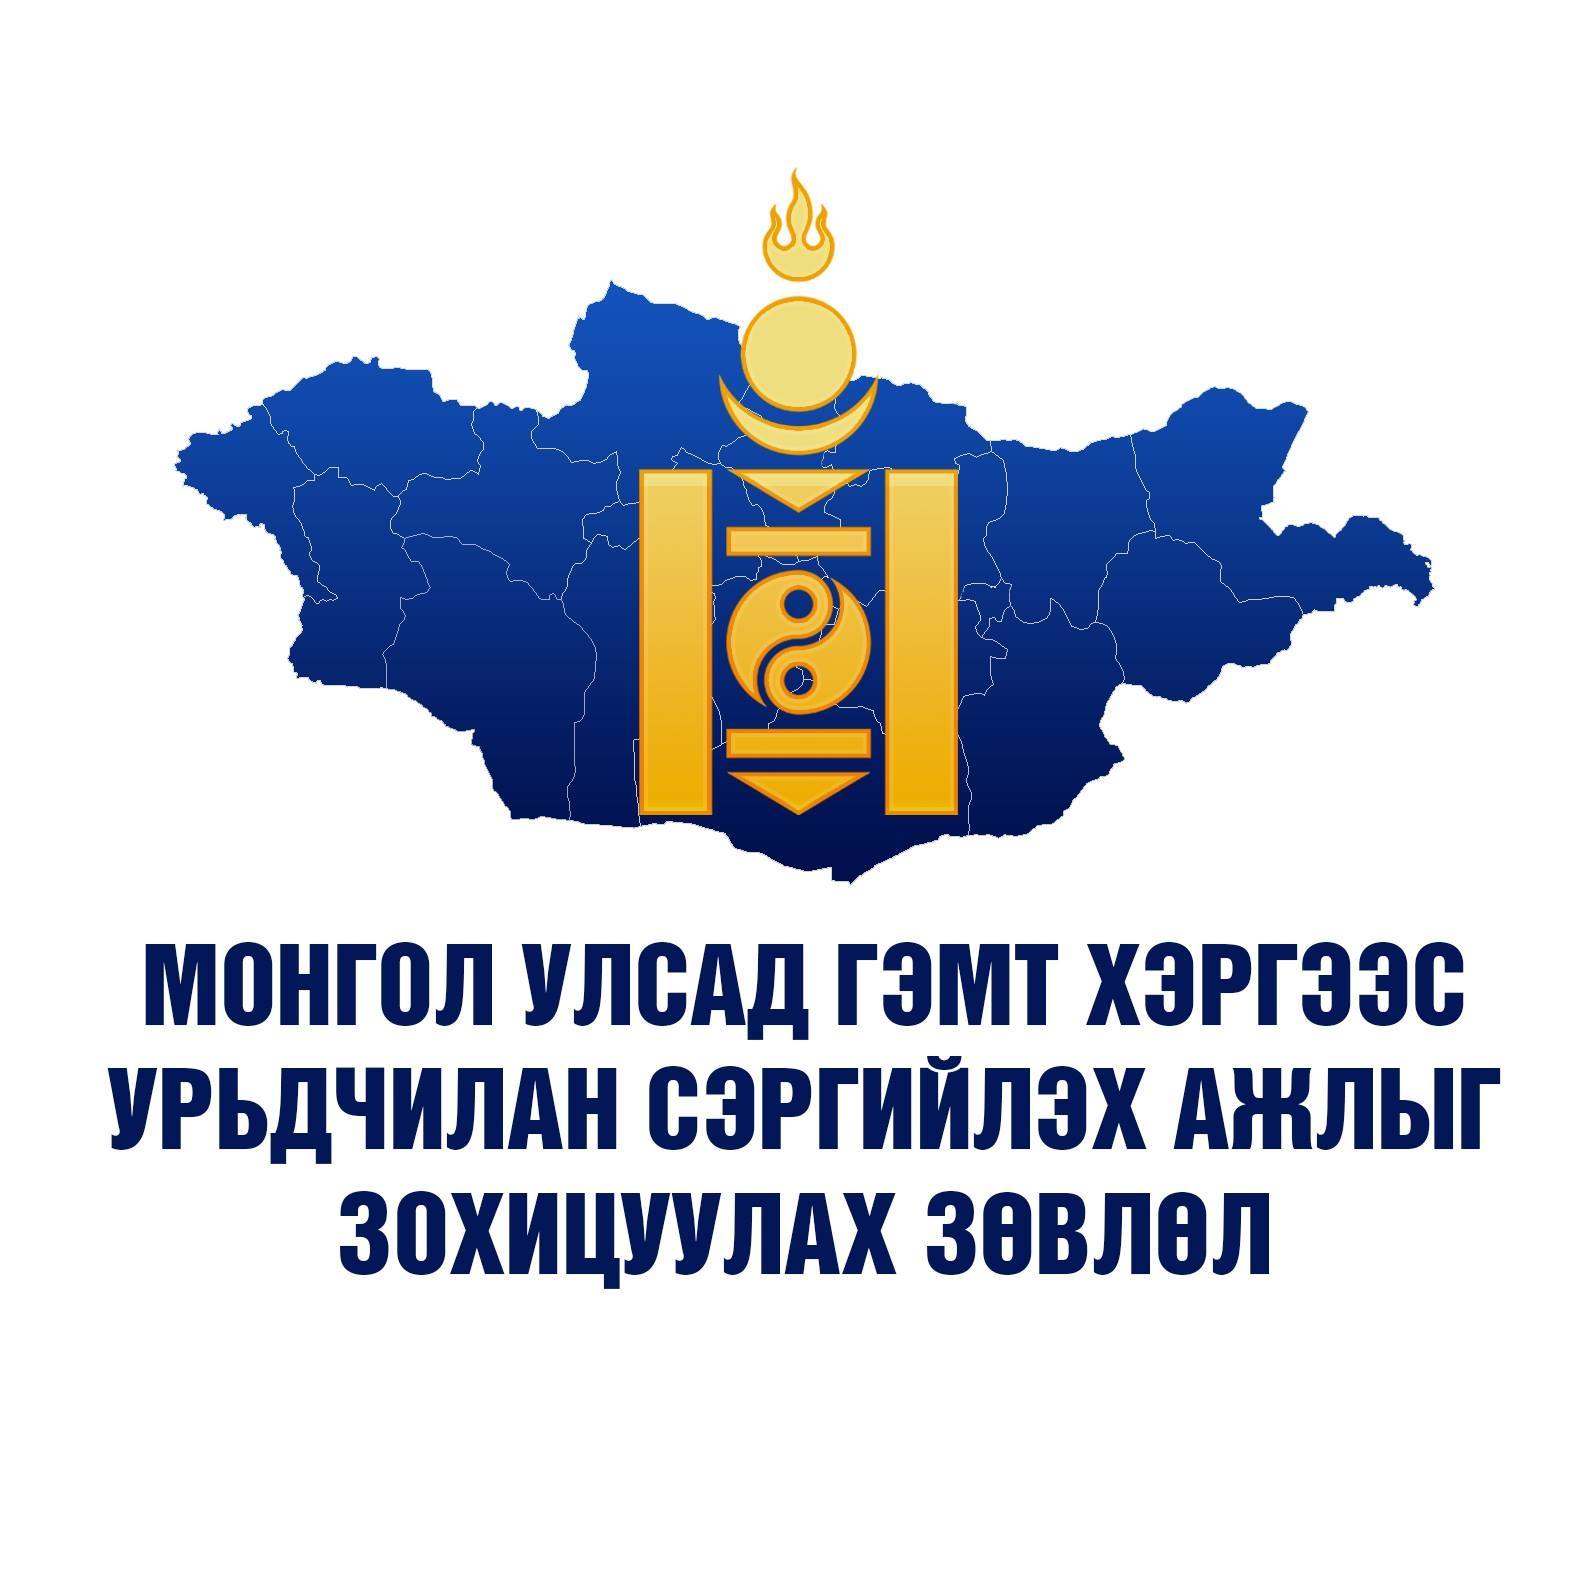 Coordination Council For Crime Prevention Of Mongolia